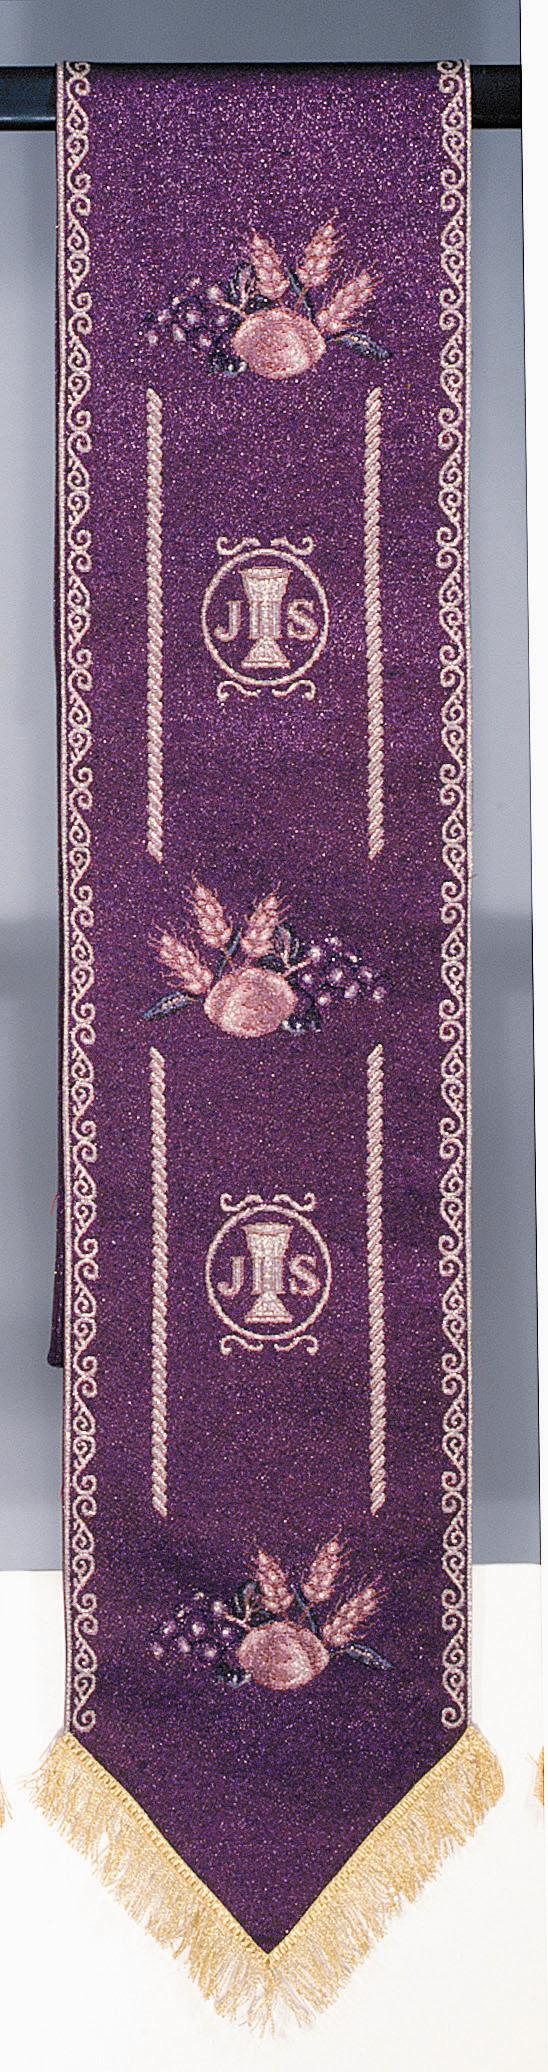 Lecturn Cover with Eucharist (large)